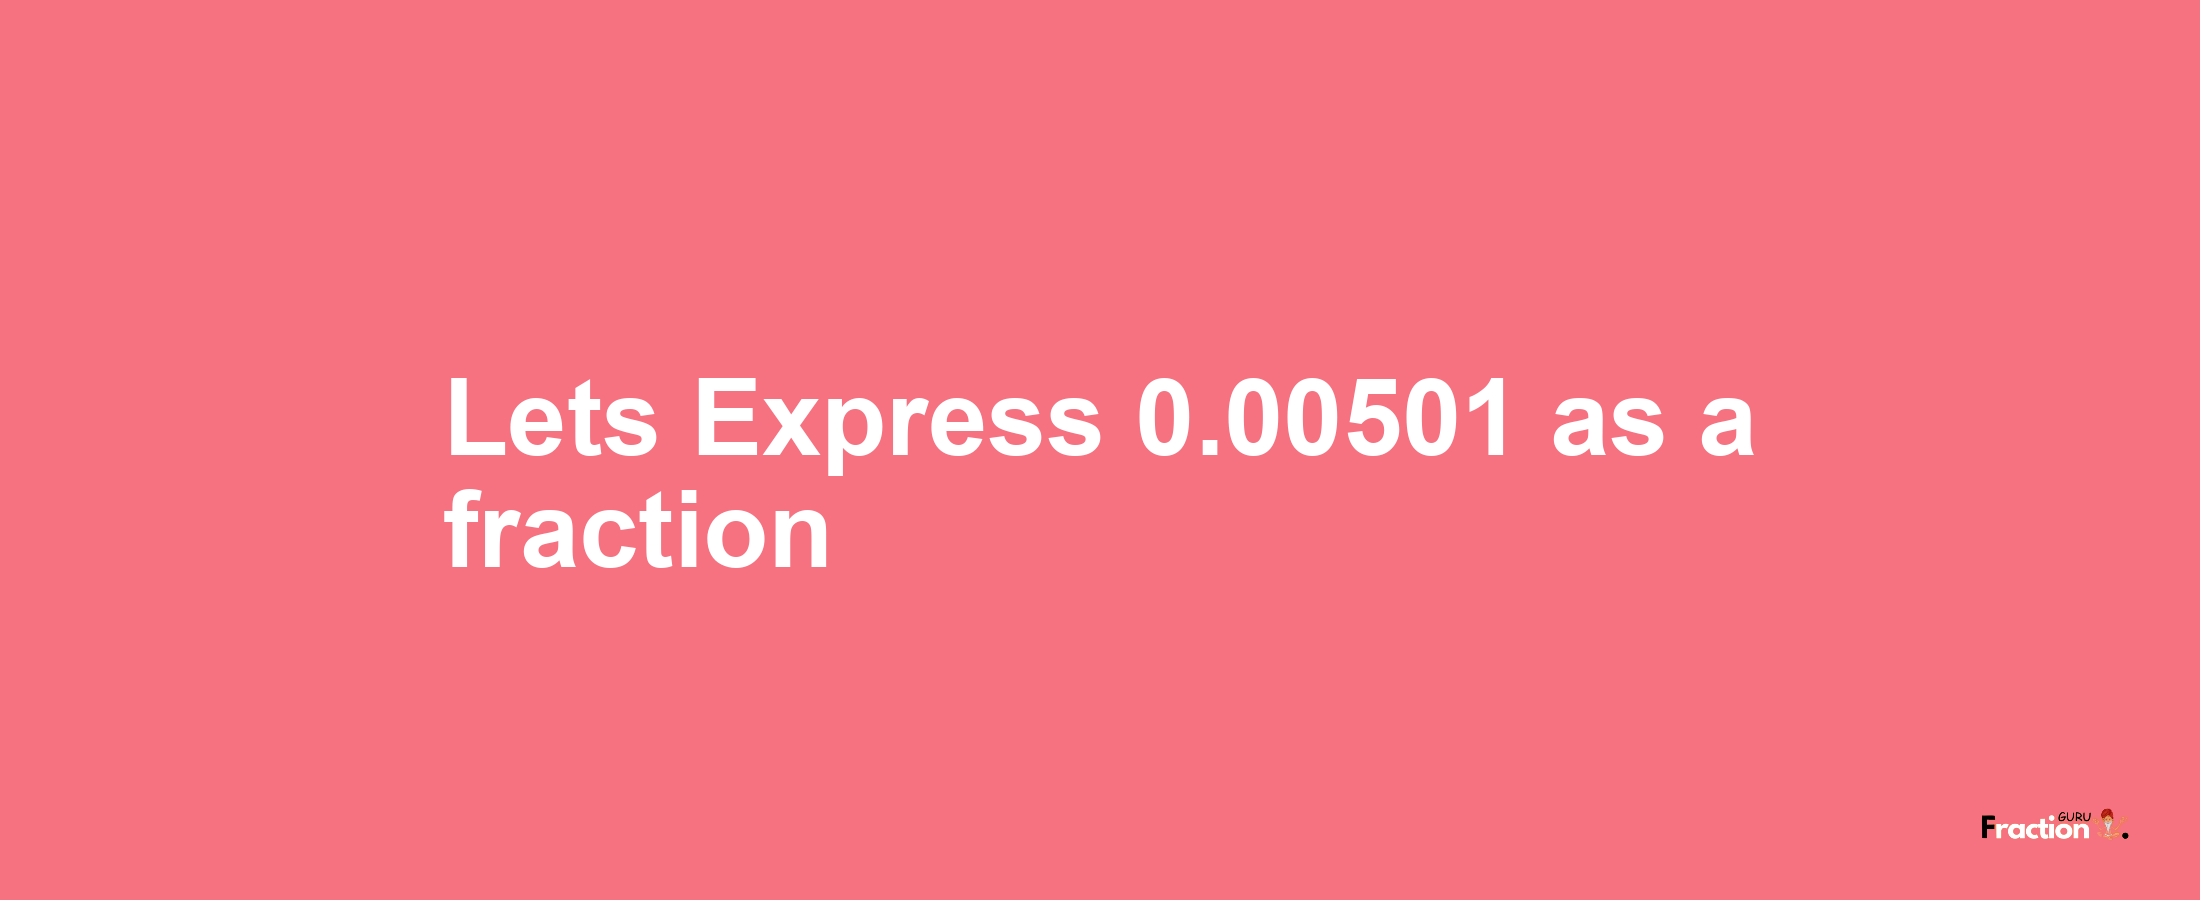 Lets Express 0.00501 as afraction